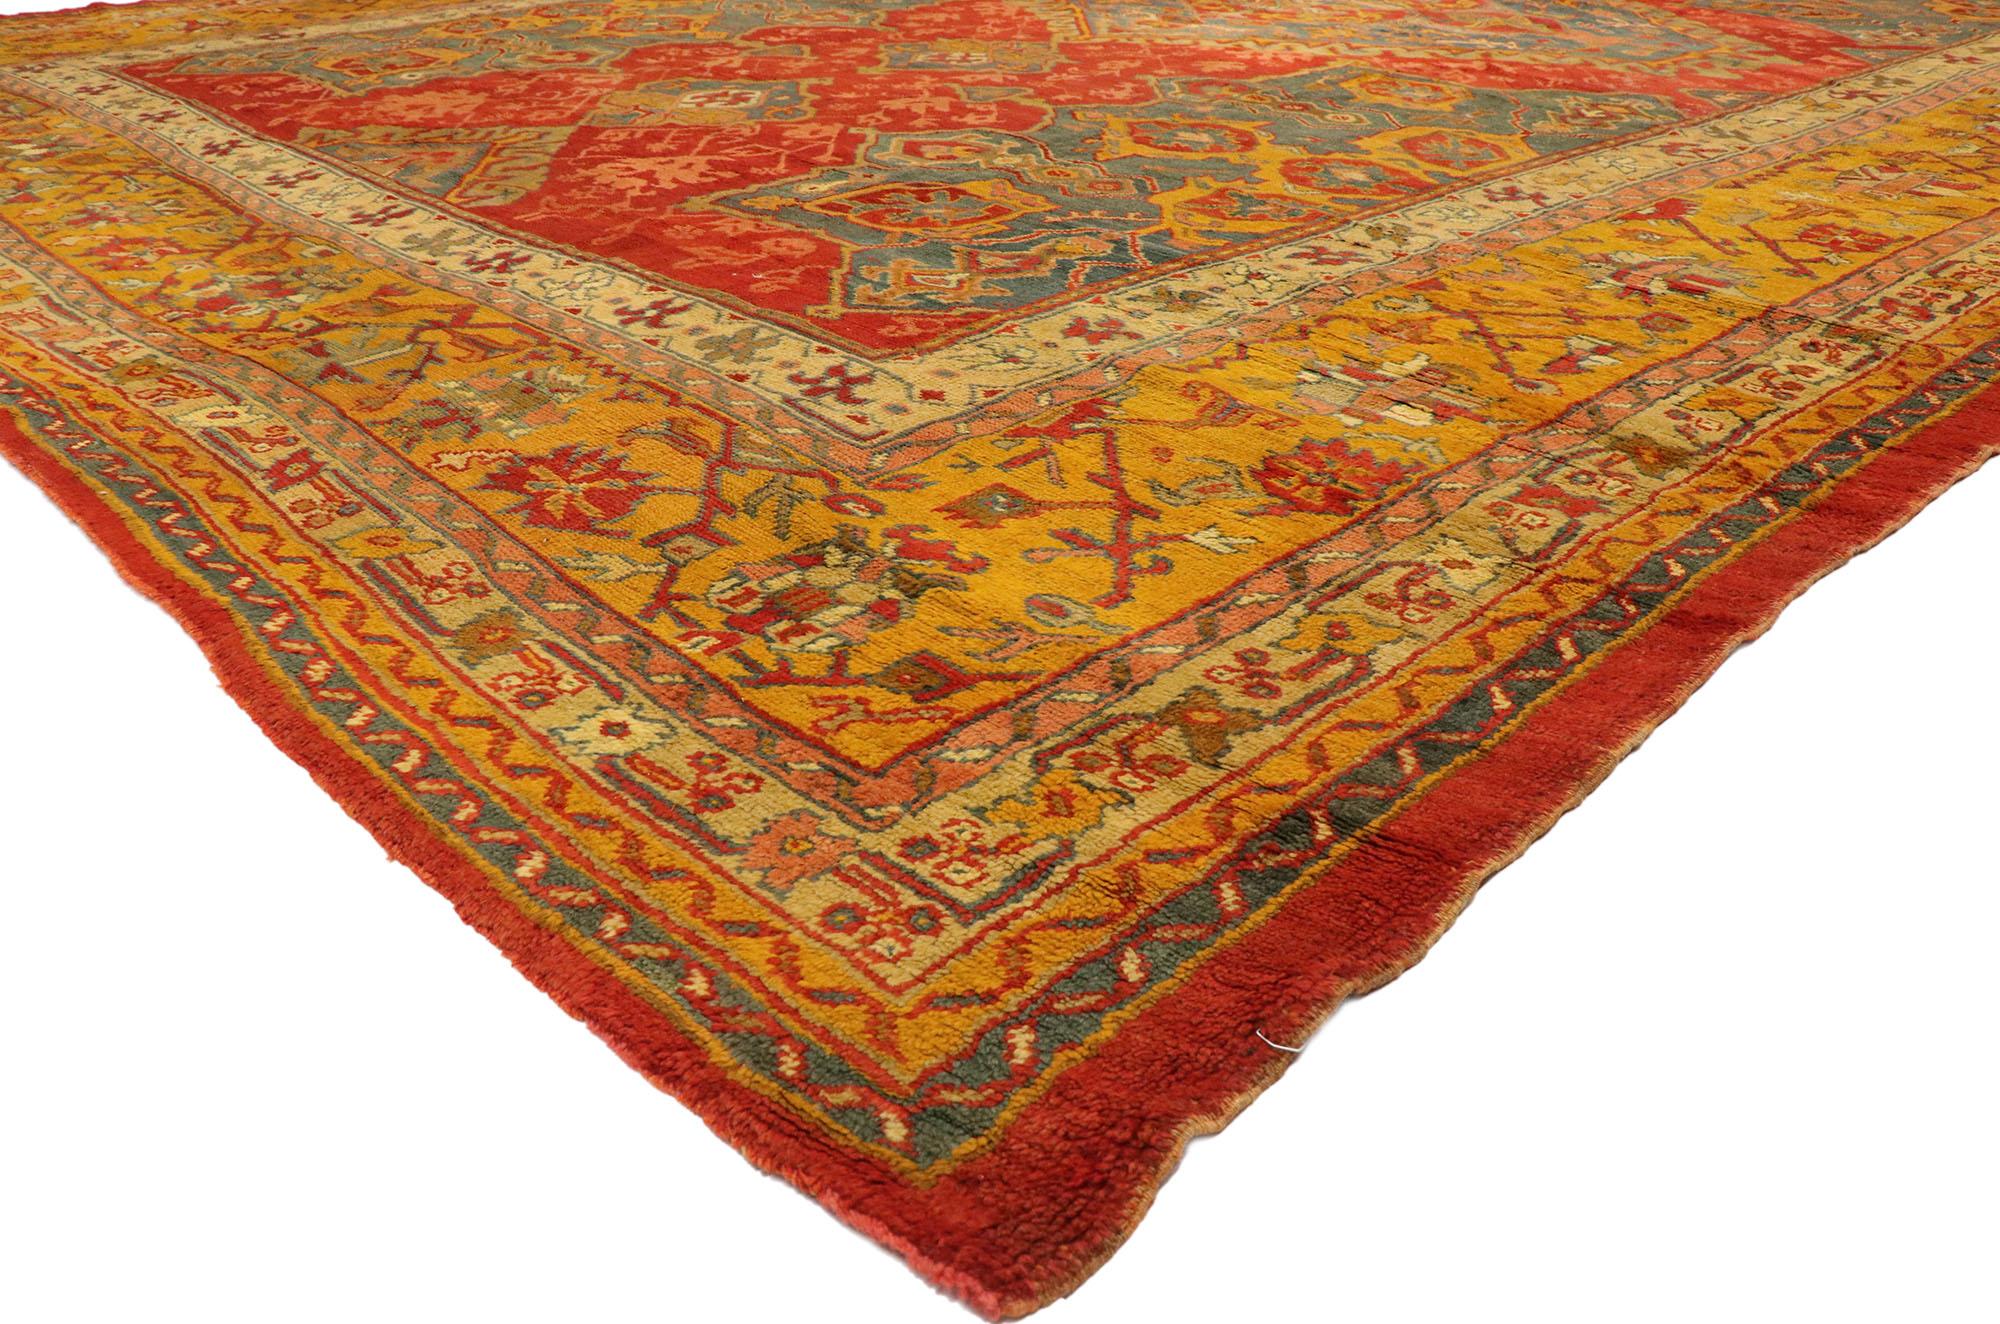 74864, late 19th century antique Turkish Smyrna rug with Modern Northwester style. With its bold expressive design, incredible detail and texture, this hand knotted wool late 19th century antique Turkish Smyrna rug is a captivating vision of woven